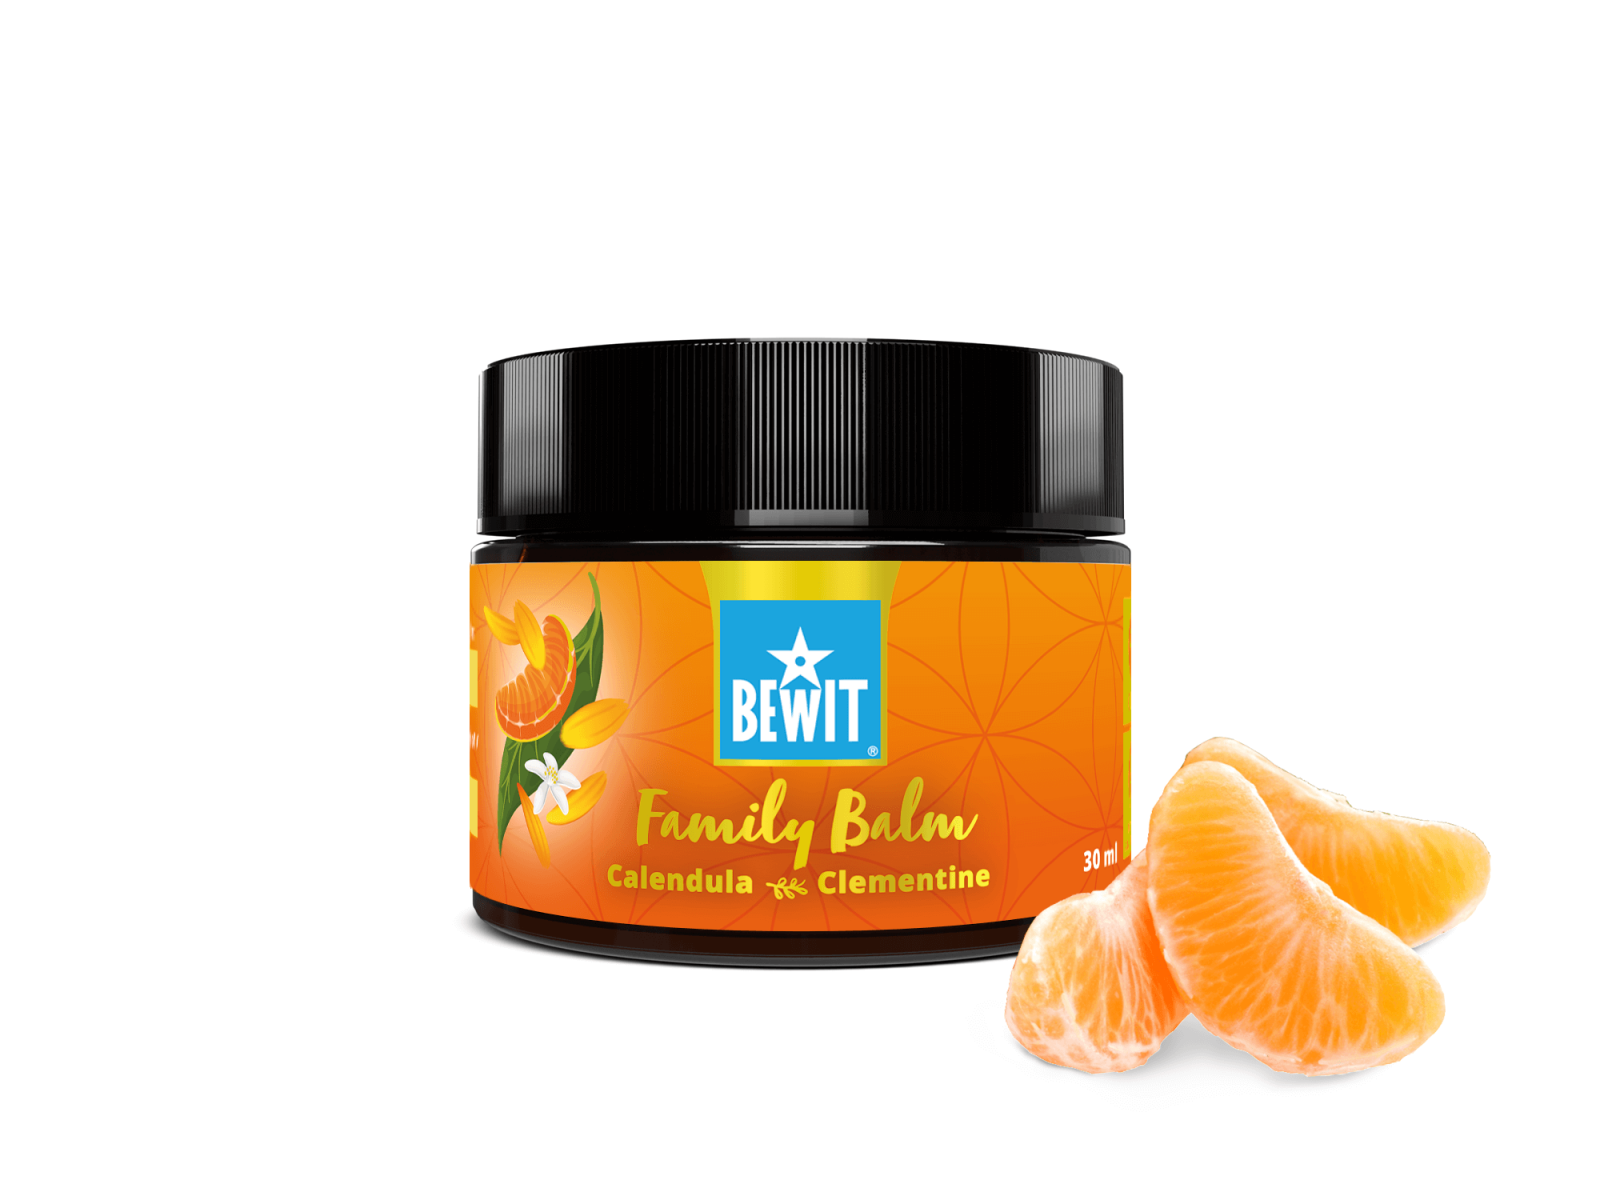 BEWIT FAMILY BALM CALENDULA AND CLEMENTINE - CARING BALM FOR THE WHOLE FAMILY - 4